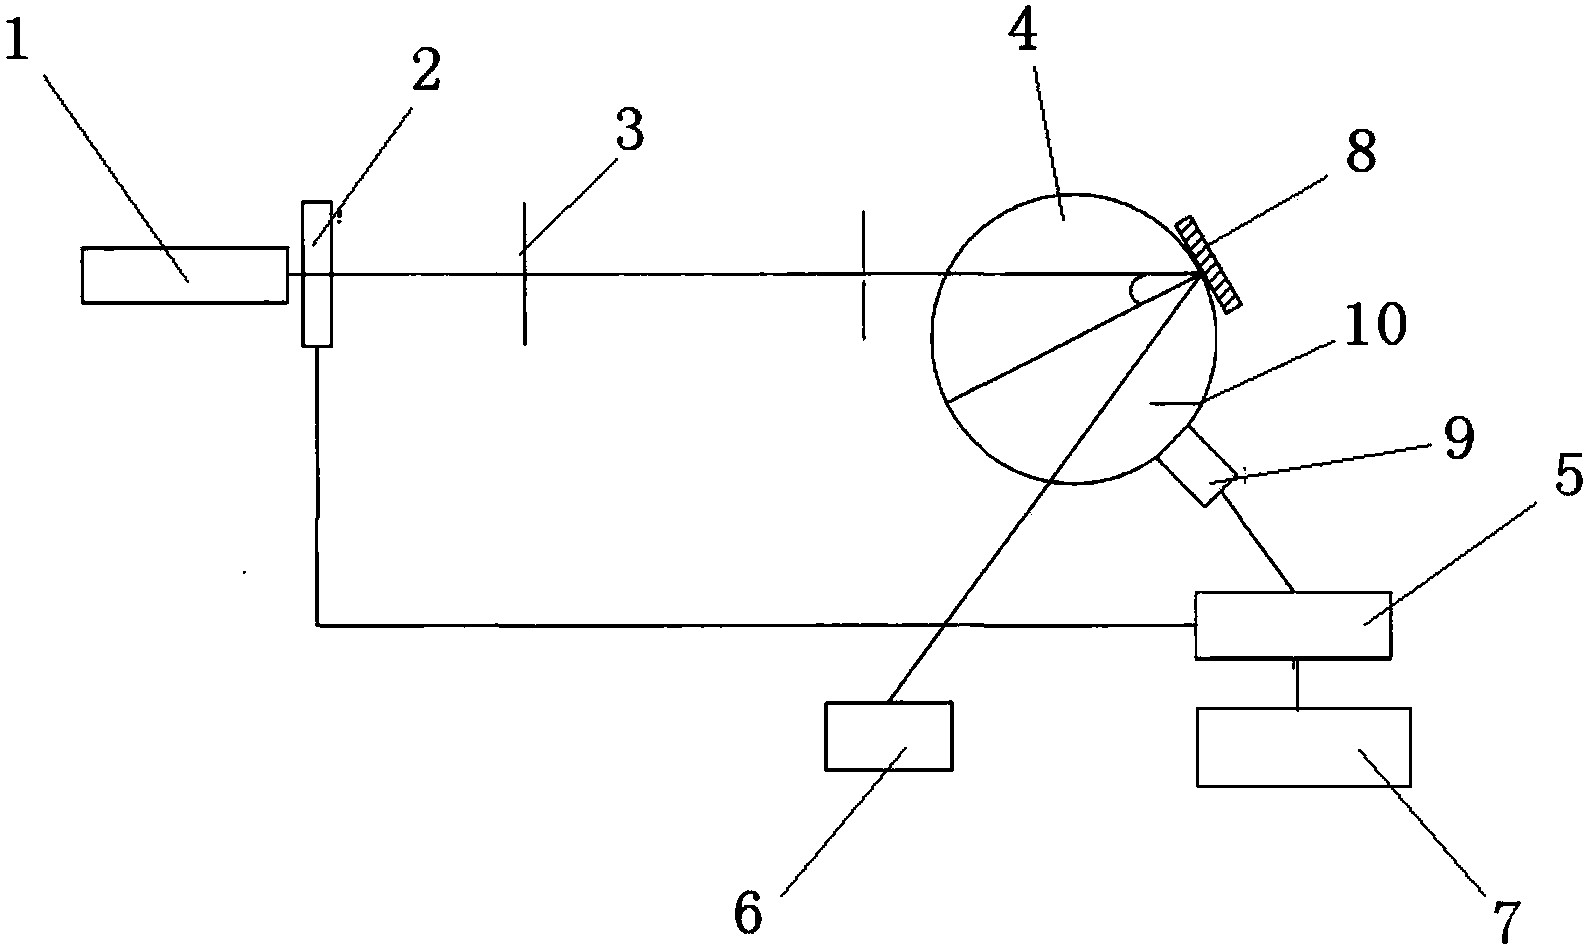 Surface light scattering measuring device